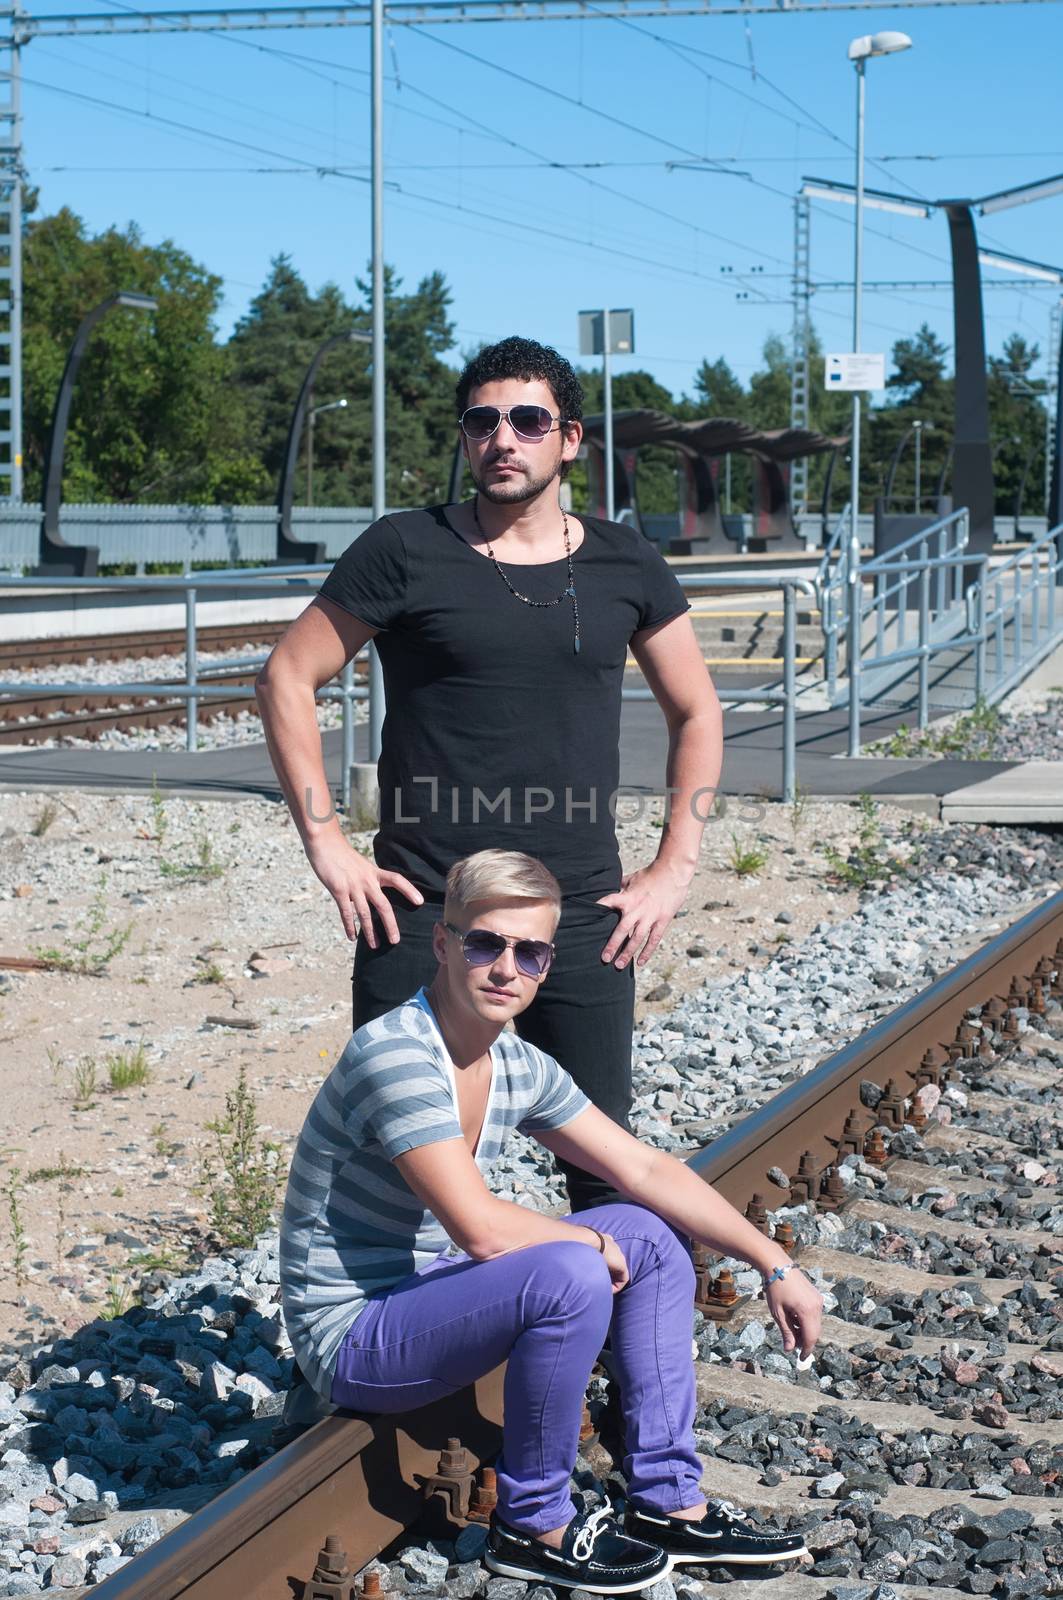 Shot of two guys on train tracks, focus on man in black